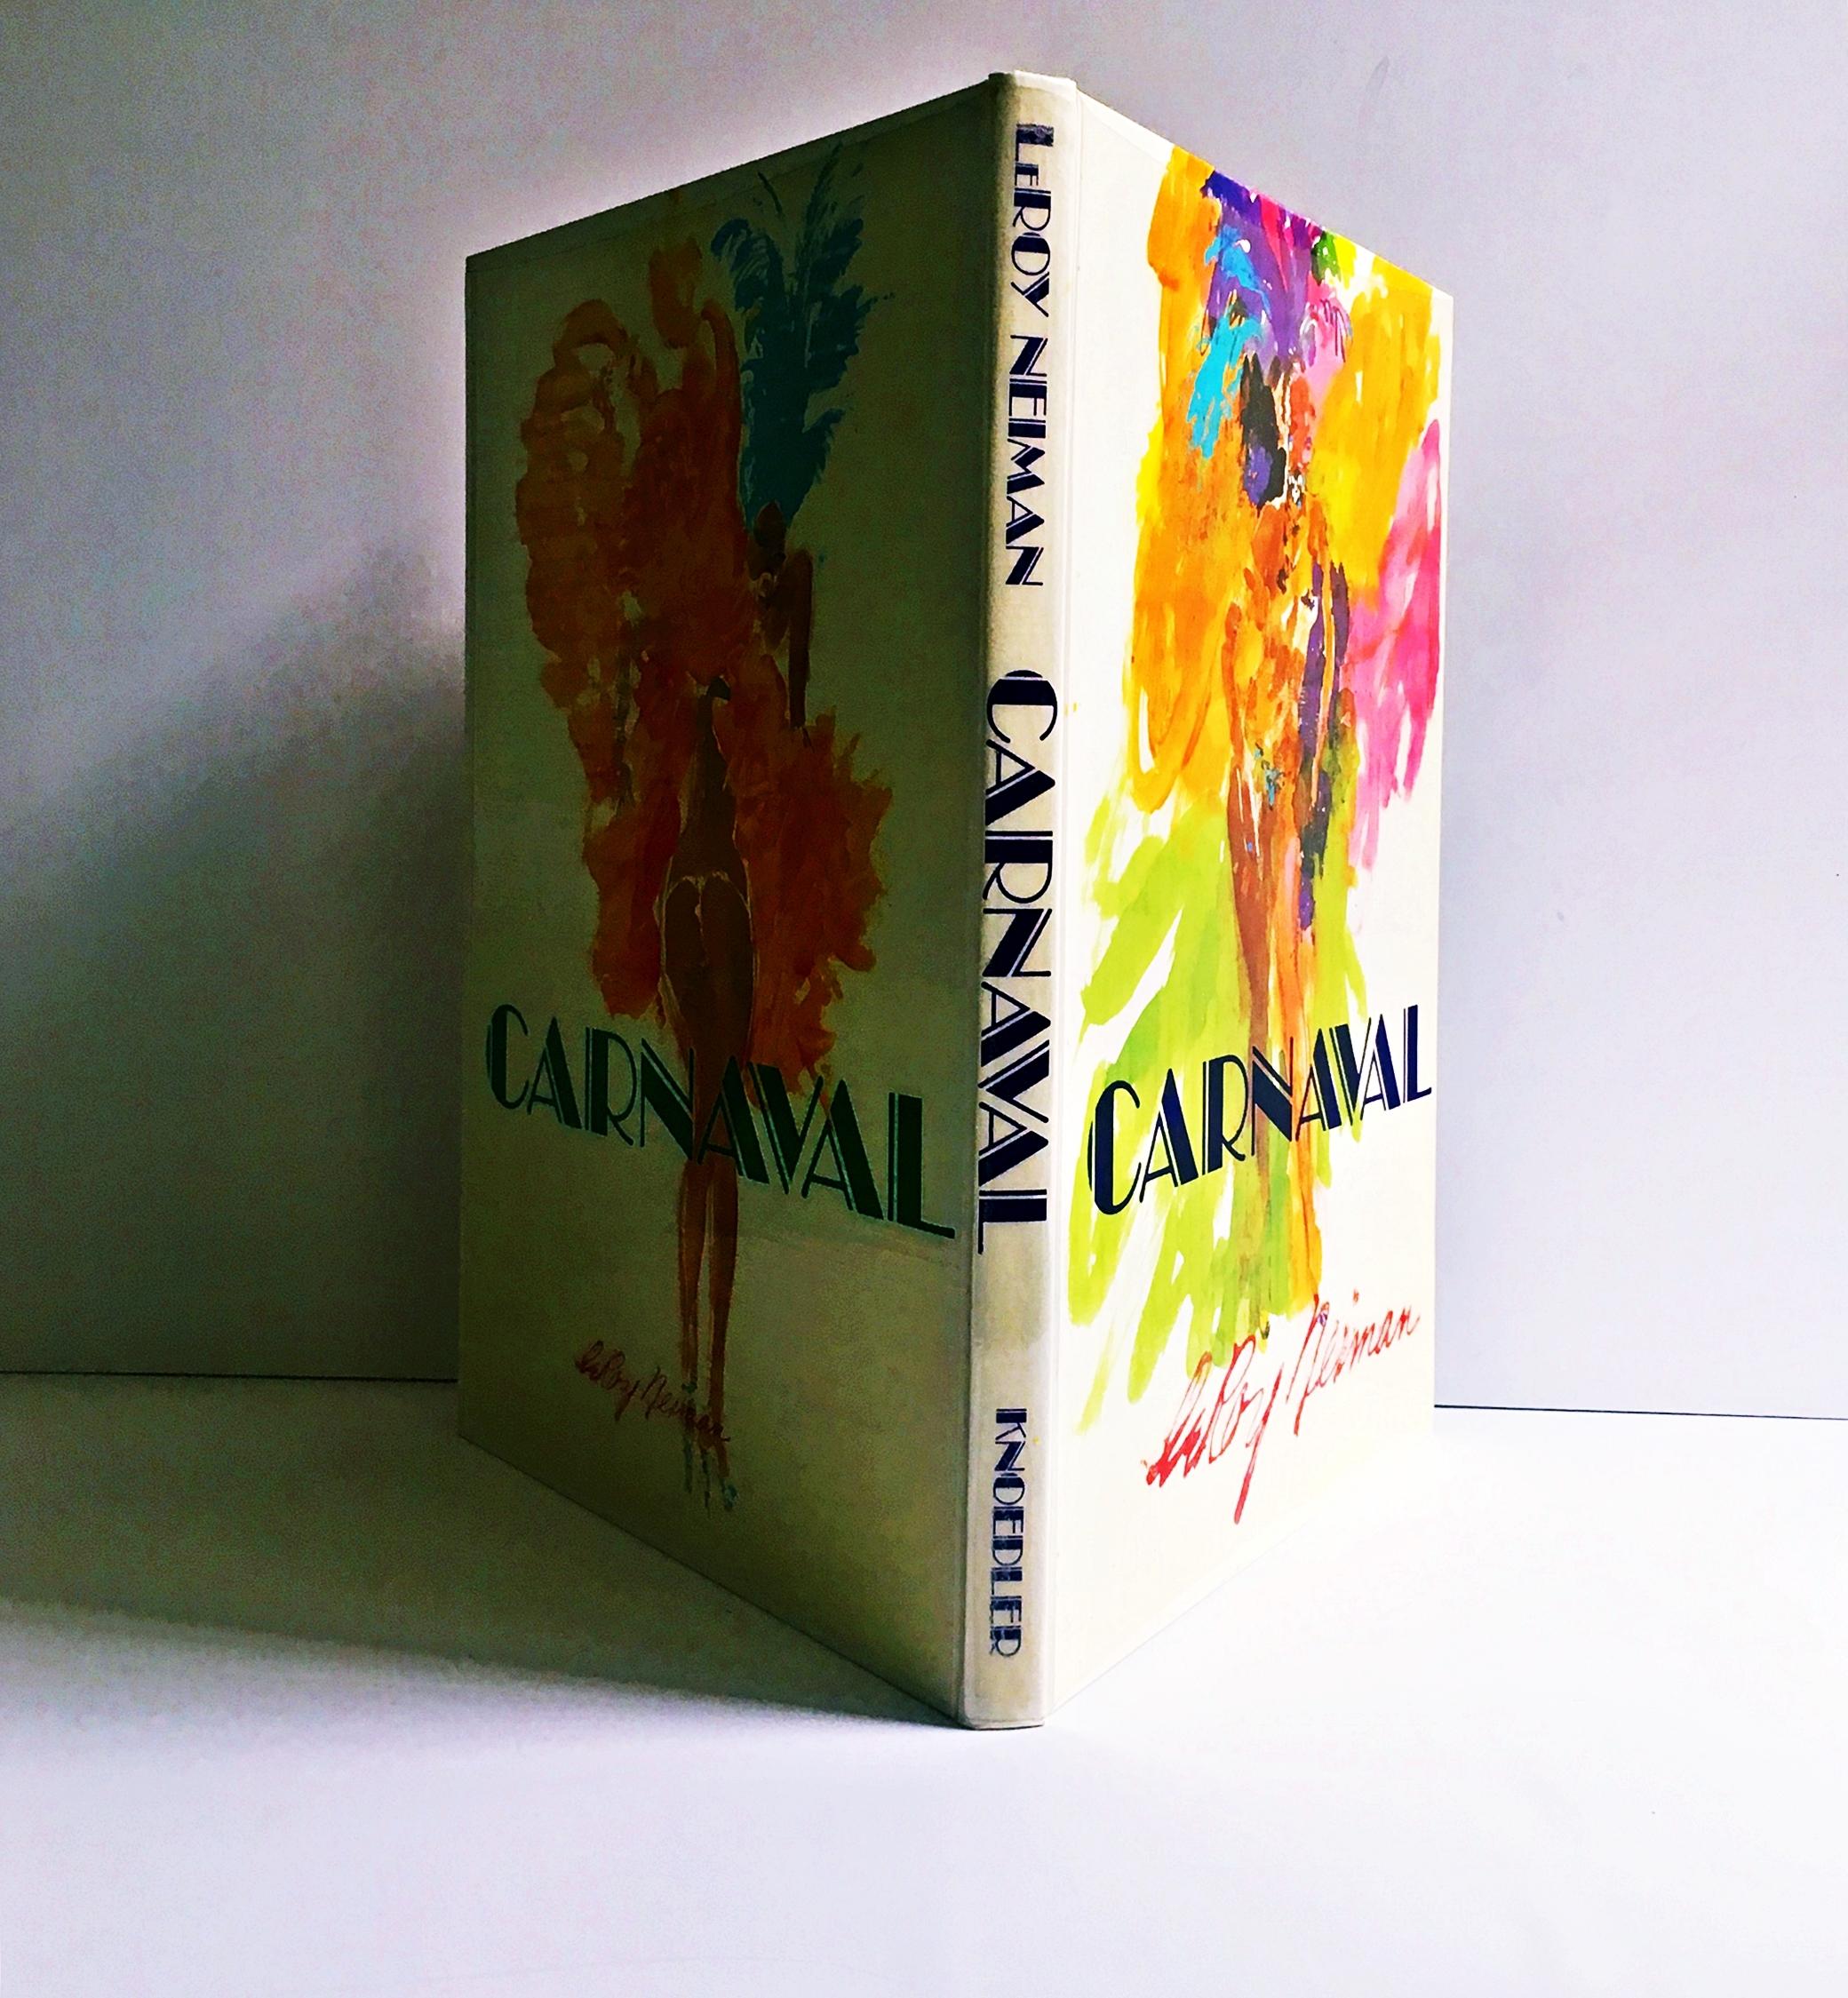 Large illustrated Carnaval gift book in bespoke box (Hand Signed and Numbered) - Pop Art Mixed Media Art by Leroy Neiman